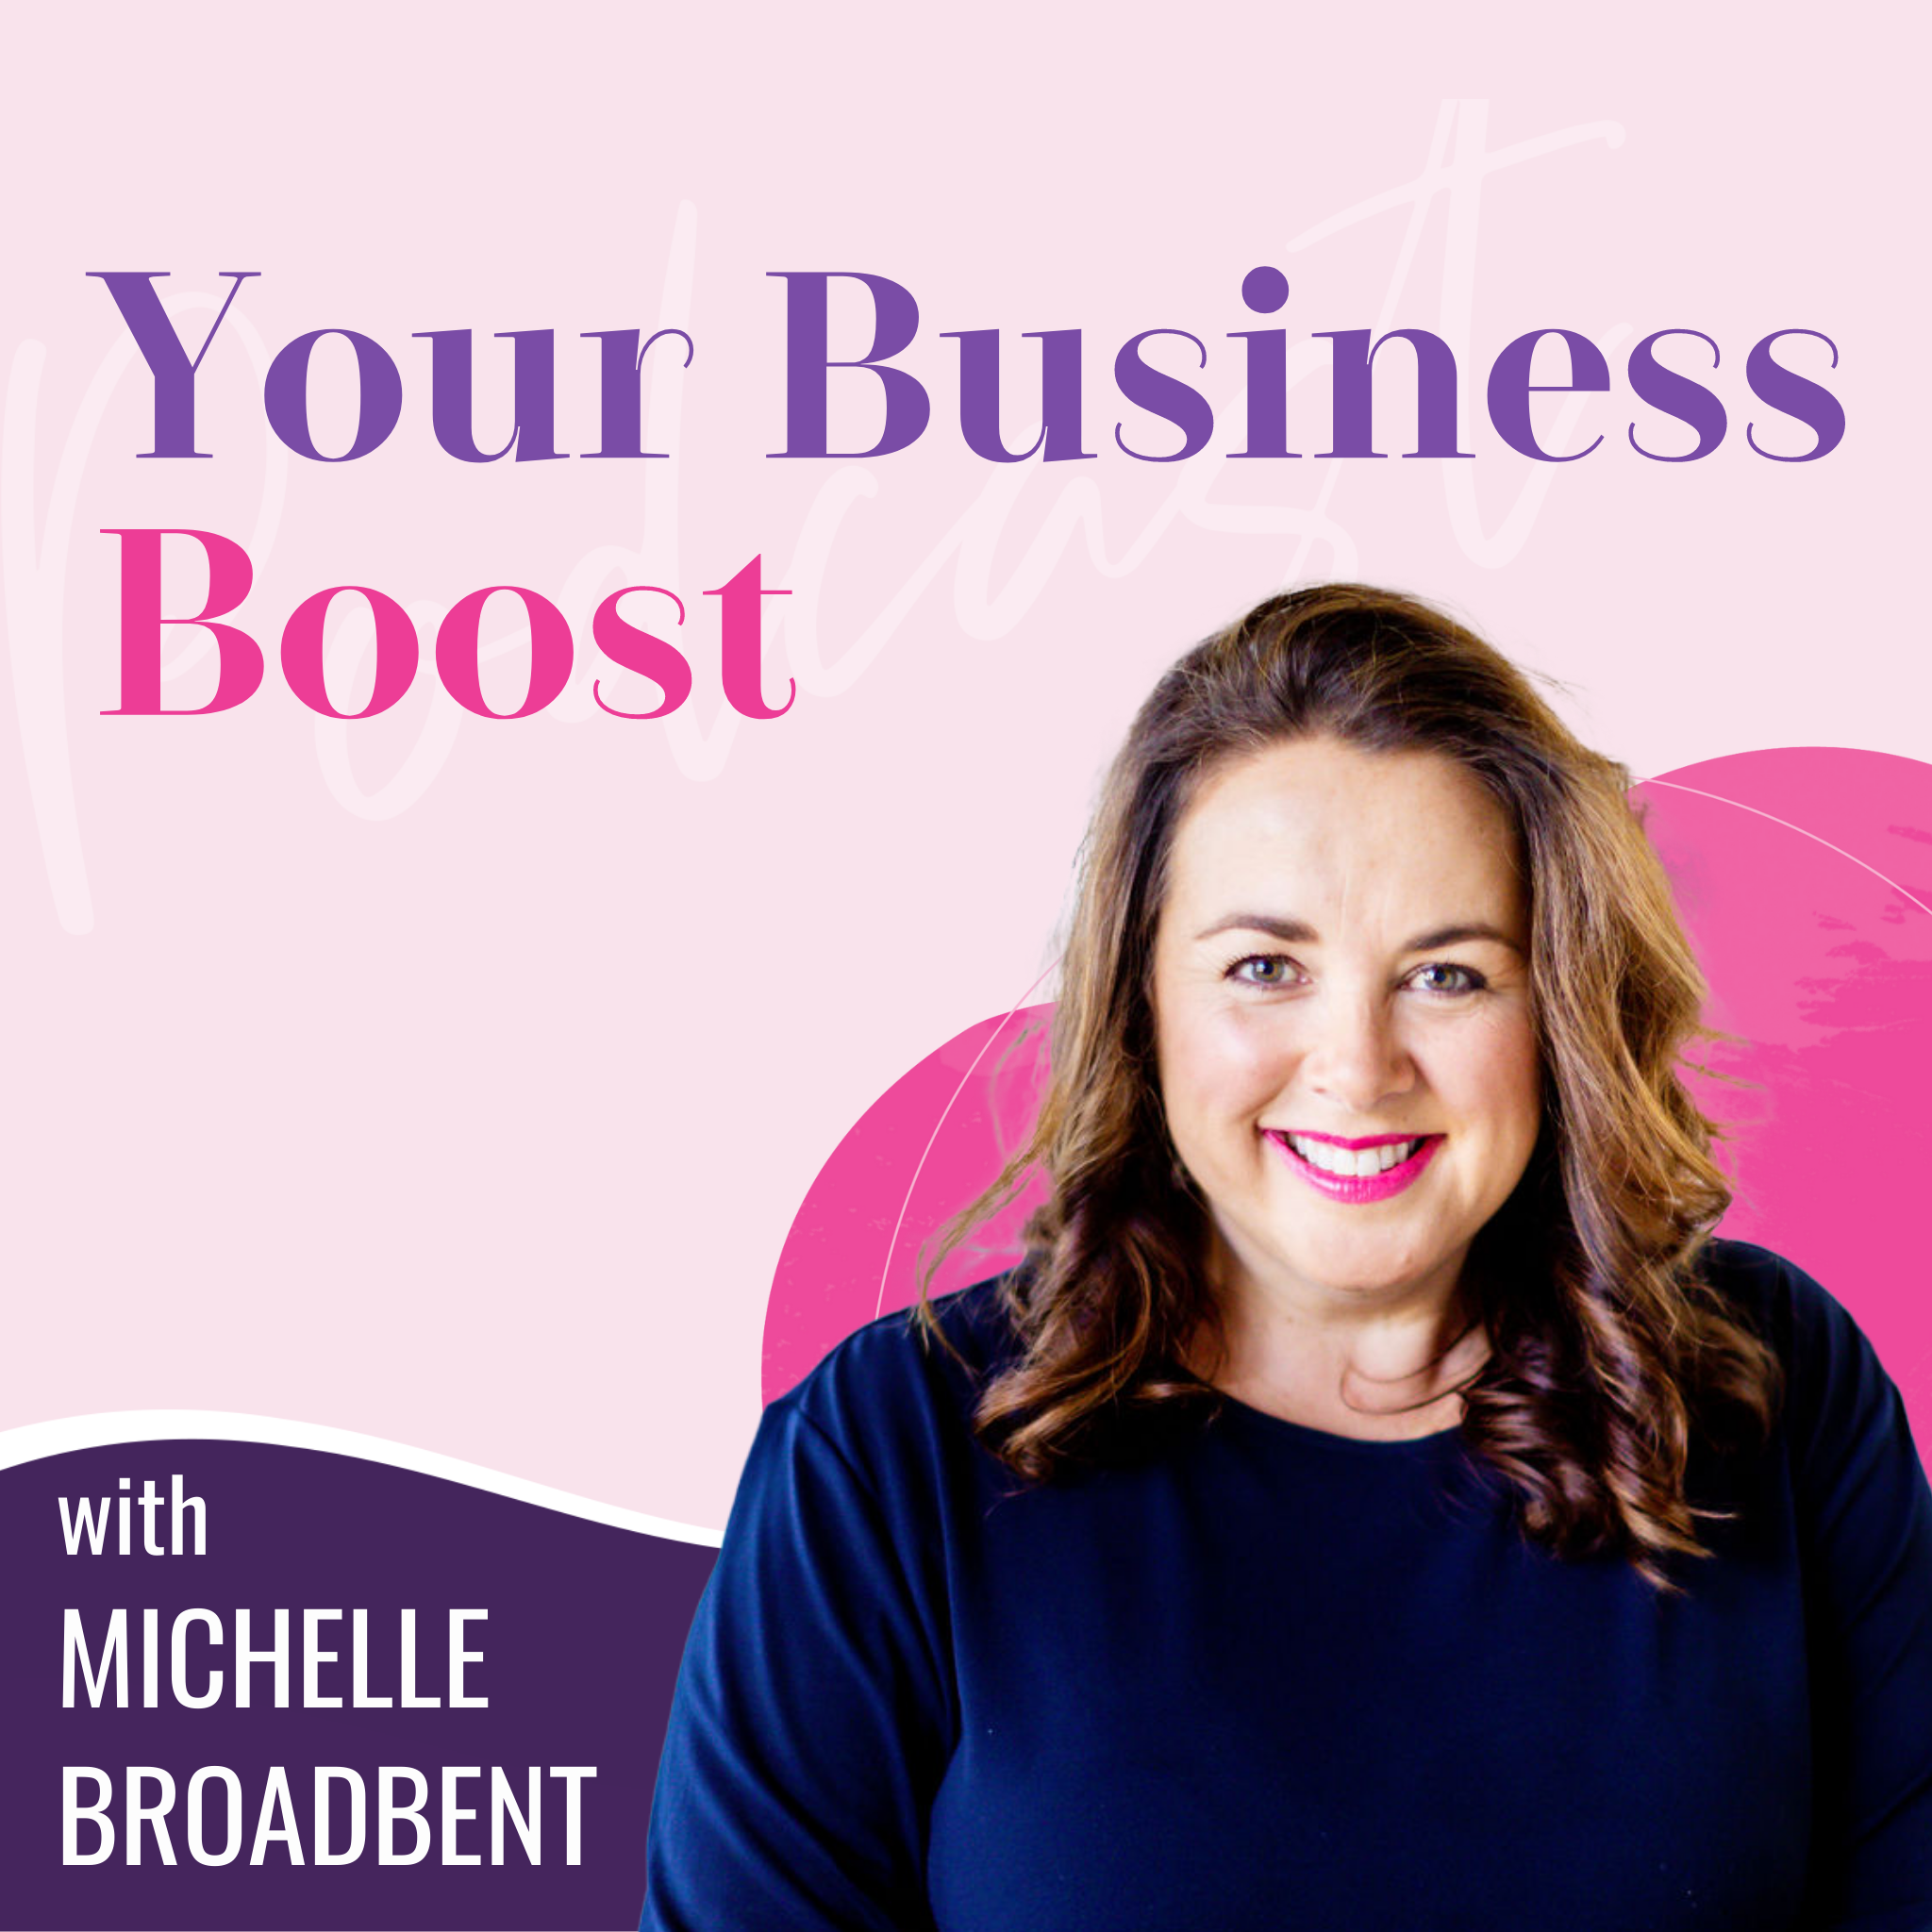 Your Business Boost Trailer